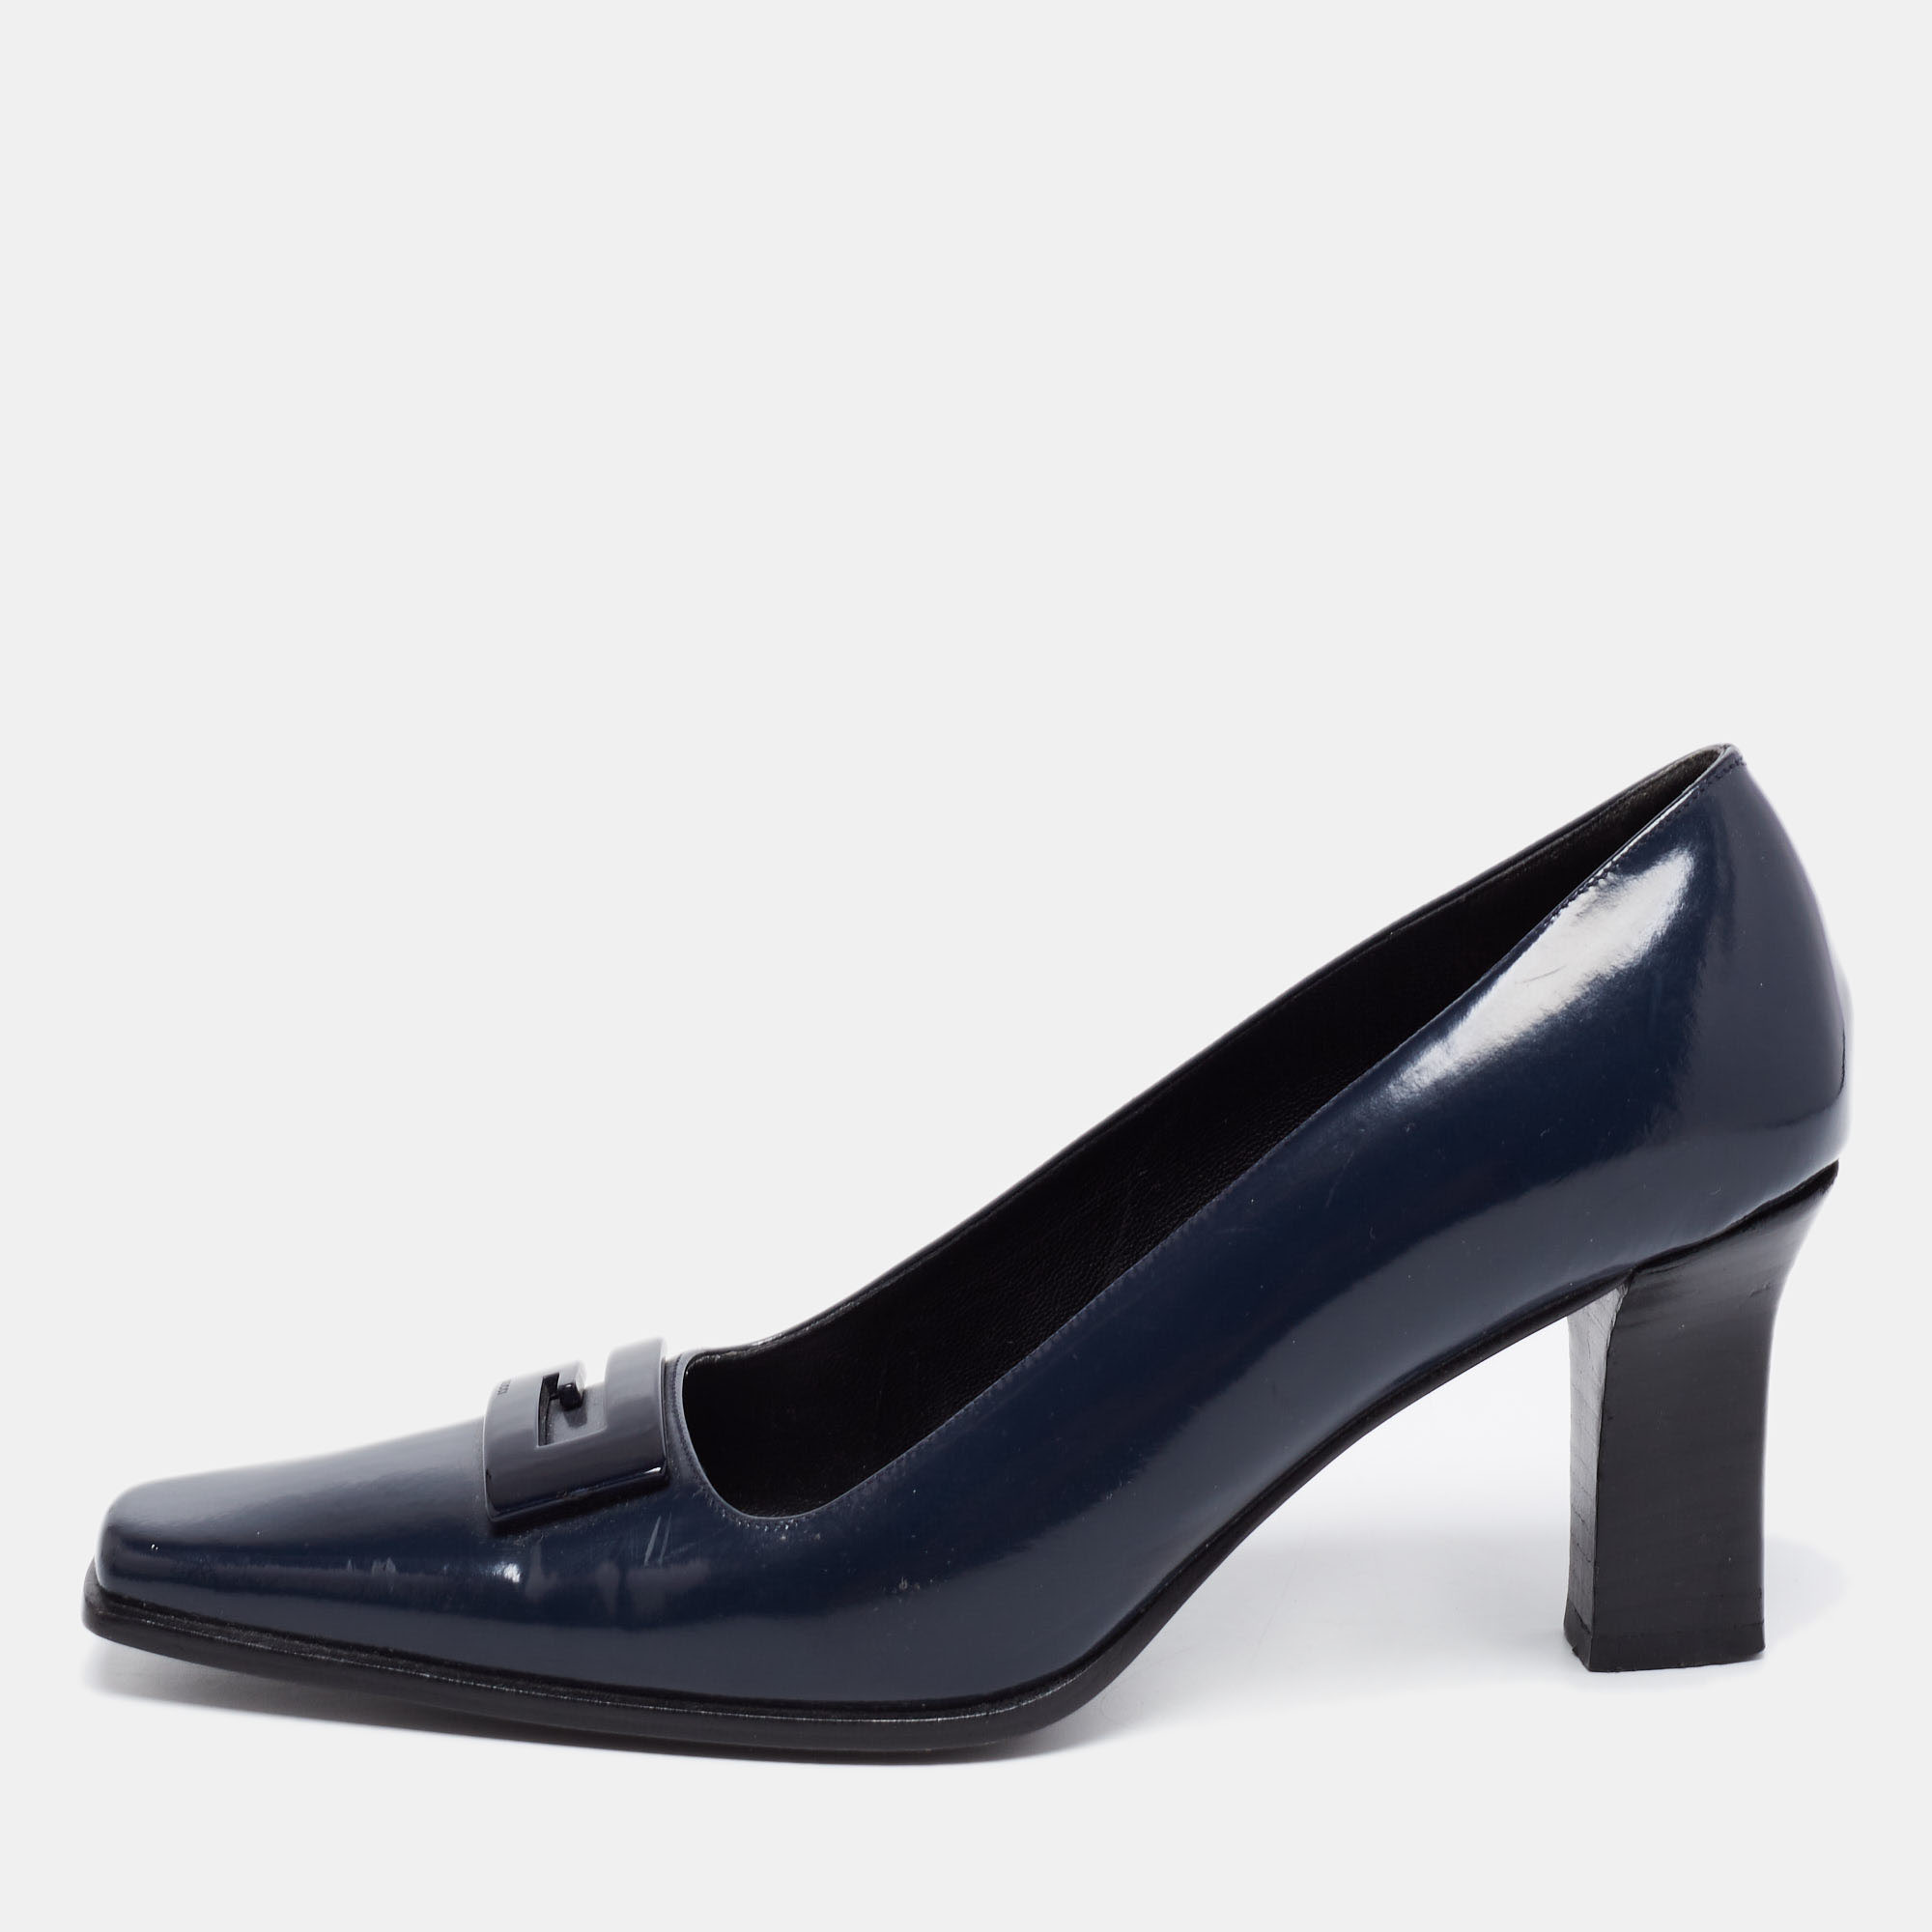 This stunning pair of pumps hails from the house of Gucci. They have been crafted from glossy patent leather in Italy and come in a lovely shade of midnight blue. They are styled with square toes logo detailing on the uppers and 7 cm heels.